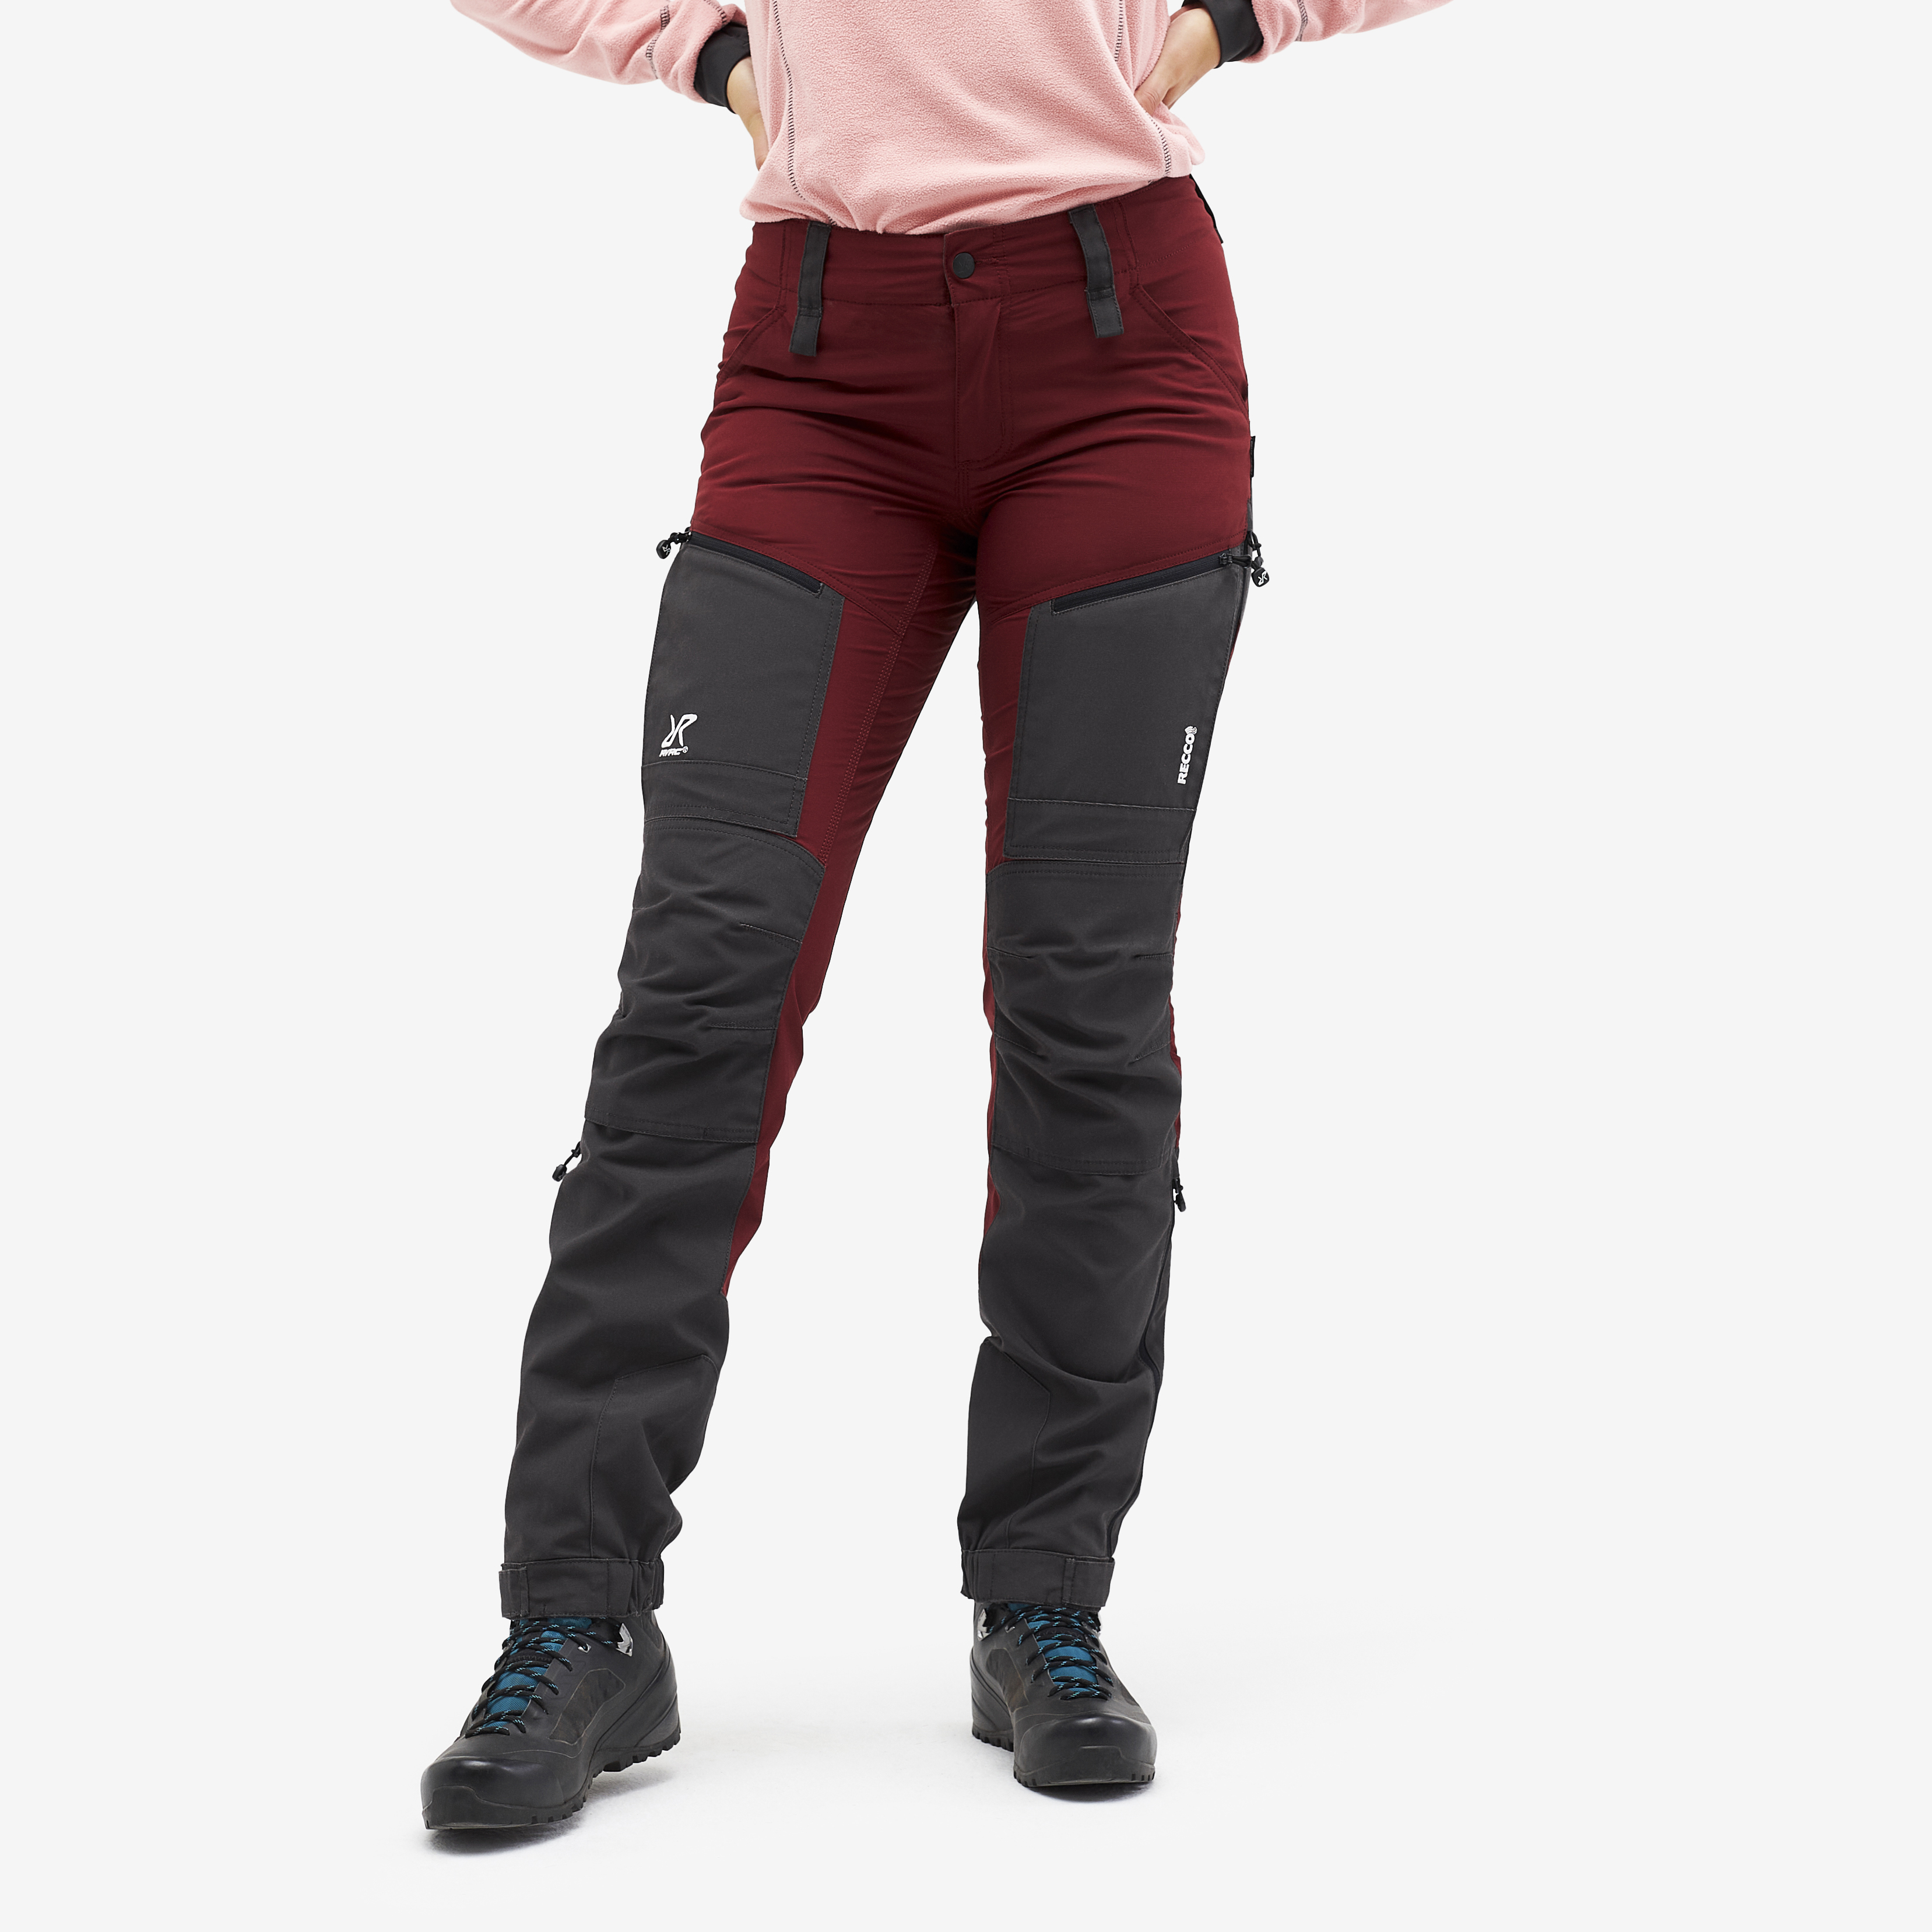 RVRC GP Pro Rescue Trousers Bison Red 2.0 Women